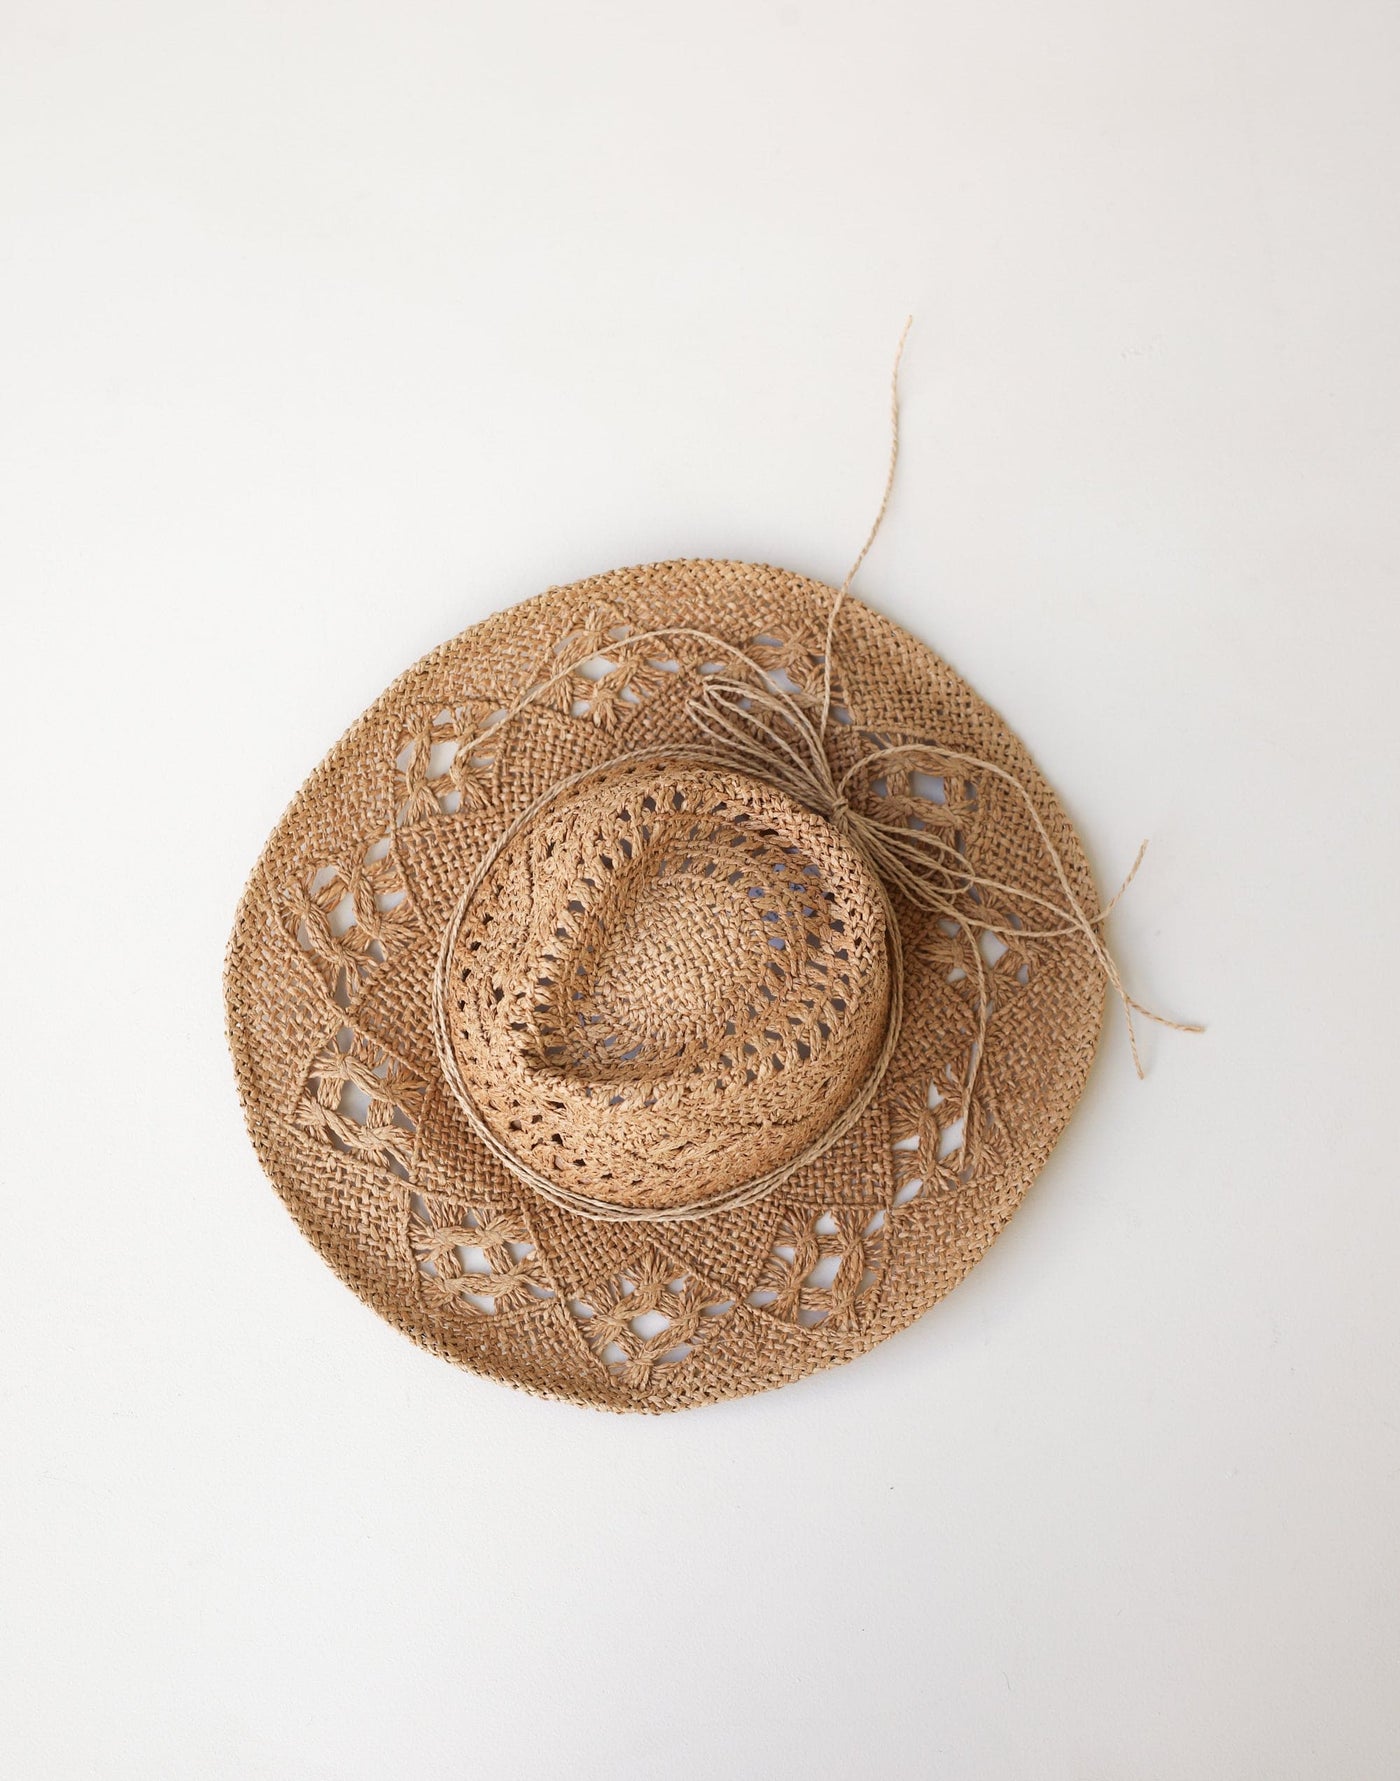 Mia Cowboy Hat (Caramel) - Woven Western Straw Hat With Bow - Women's Accessories - Charcoal Clothing